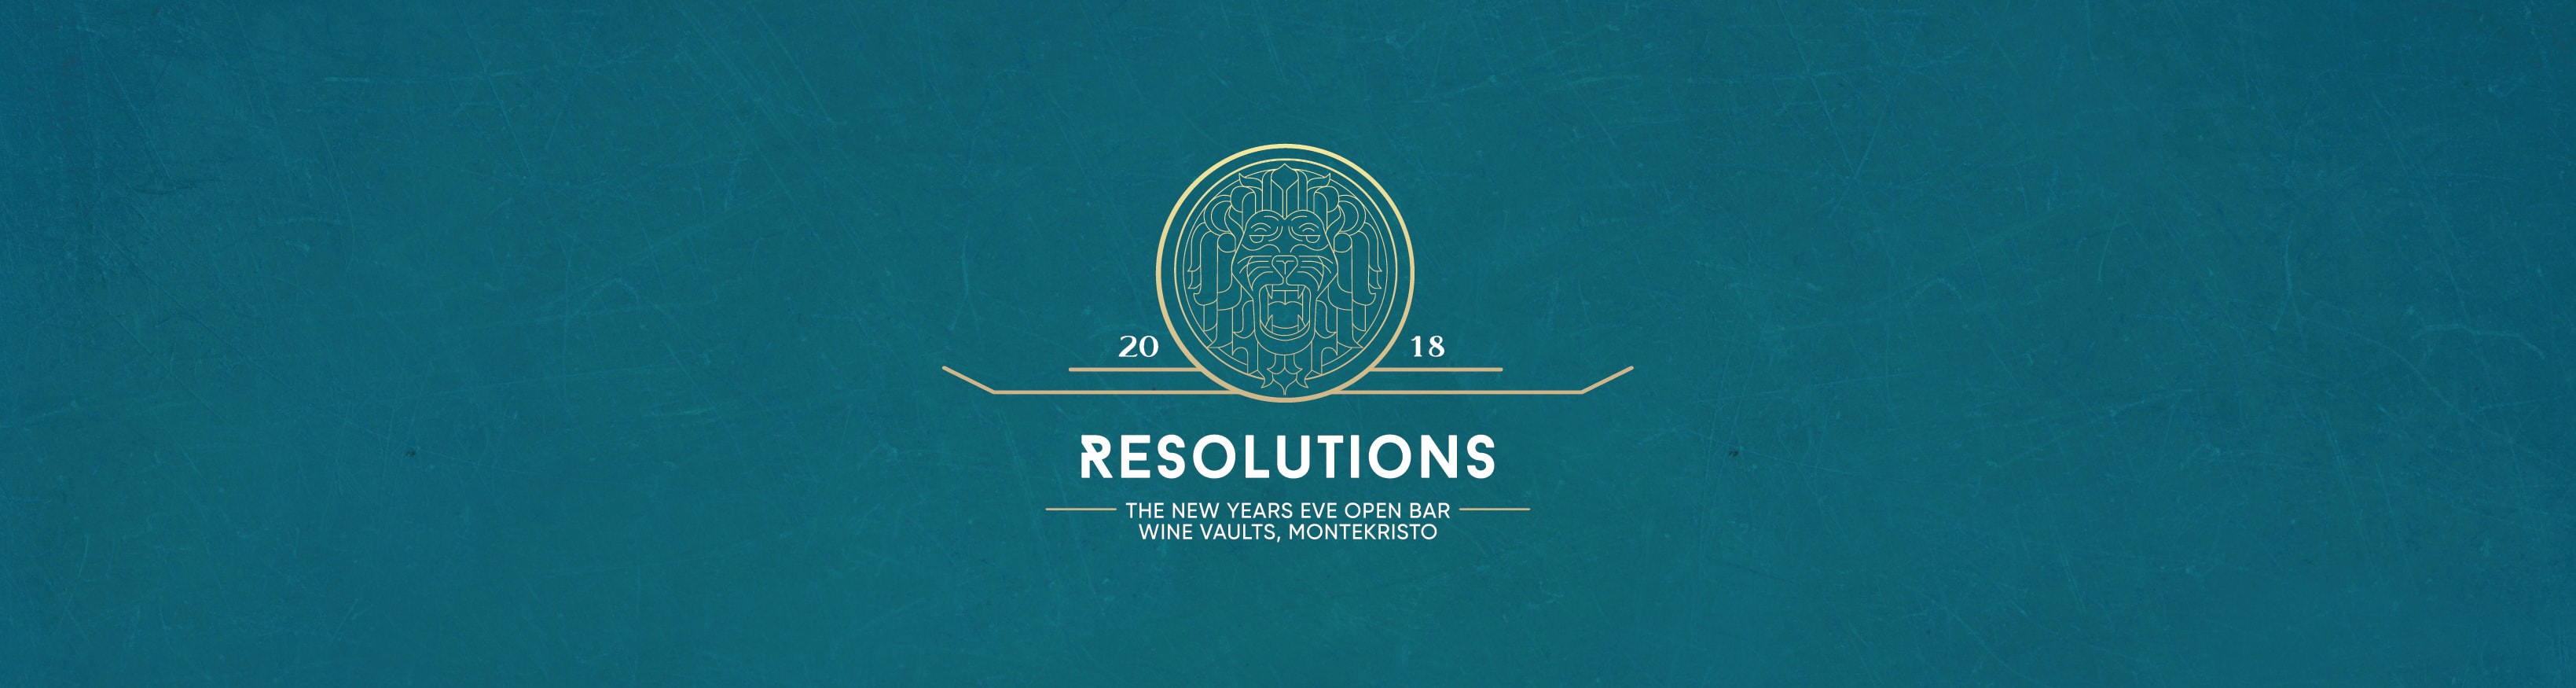 New Year's Eve Resolutions